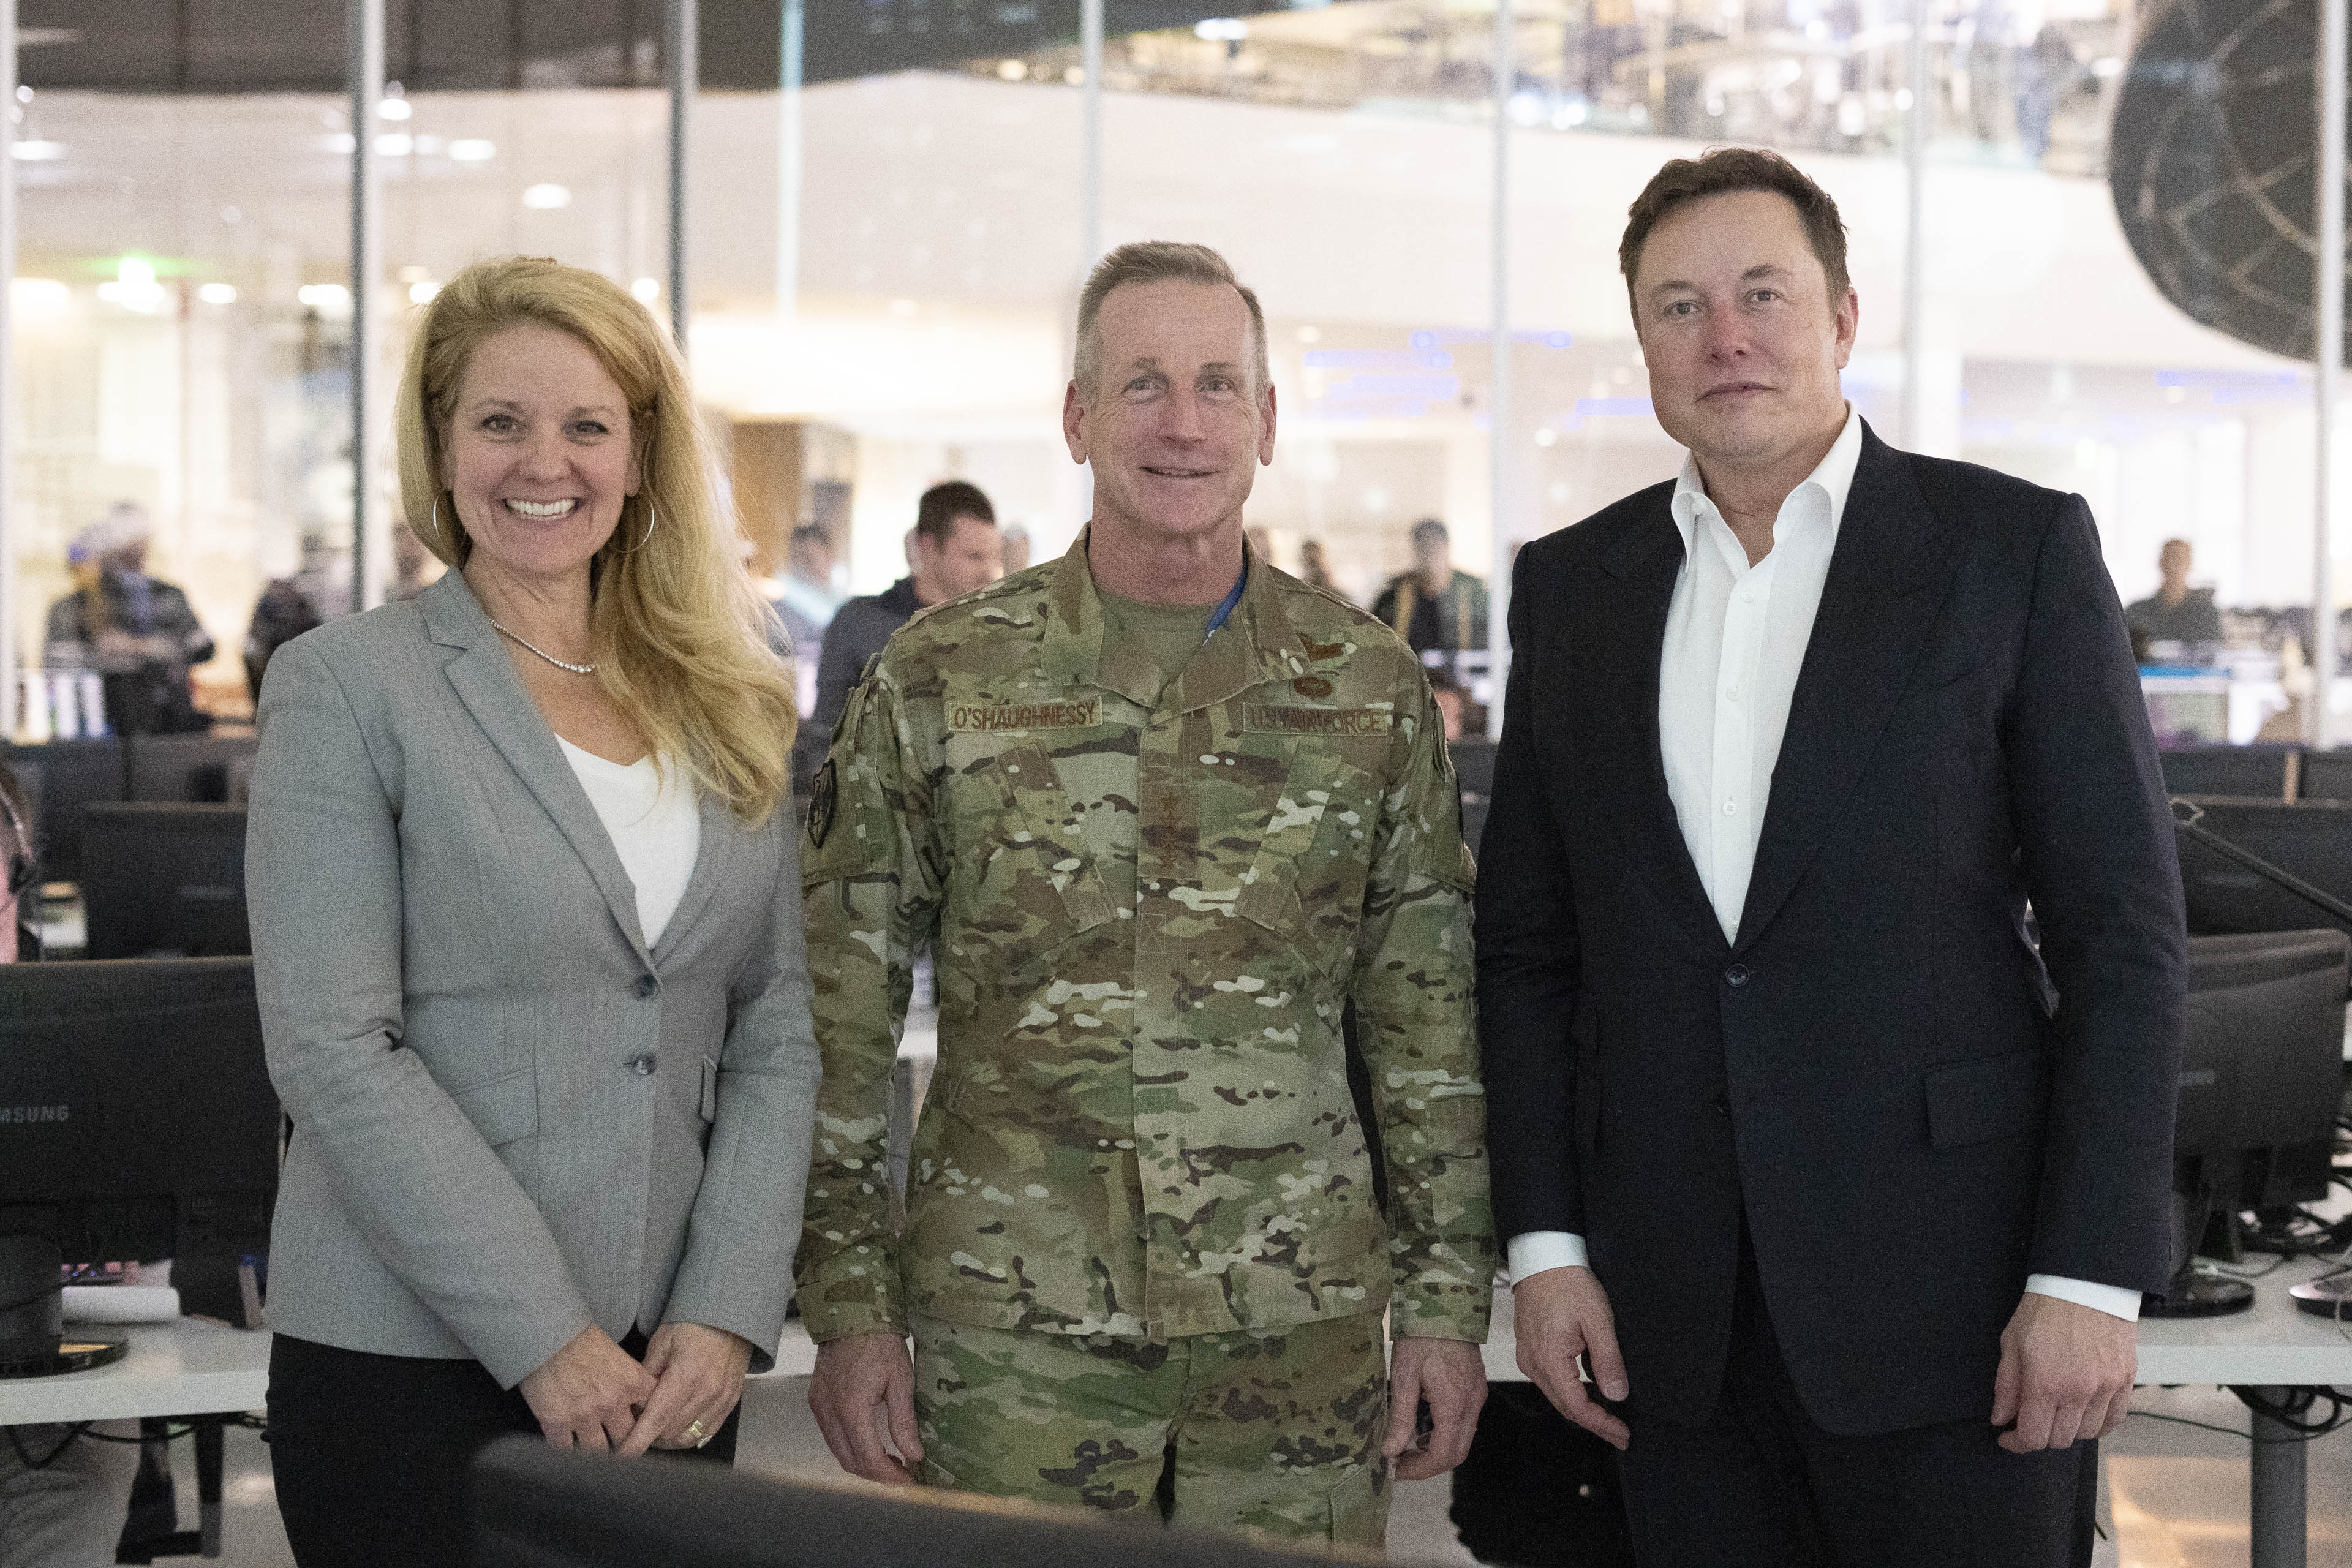 U.S. Air Force General and Commander of The North American Aerospace Defense Command toured SpaceX facilities